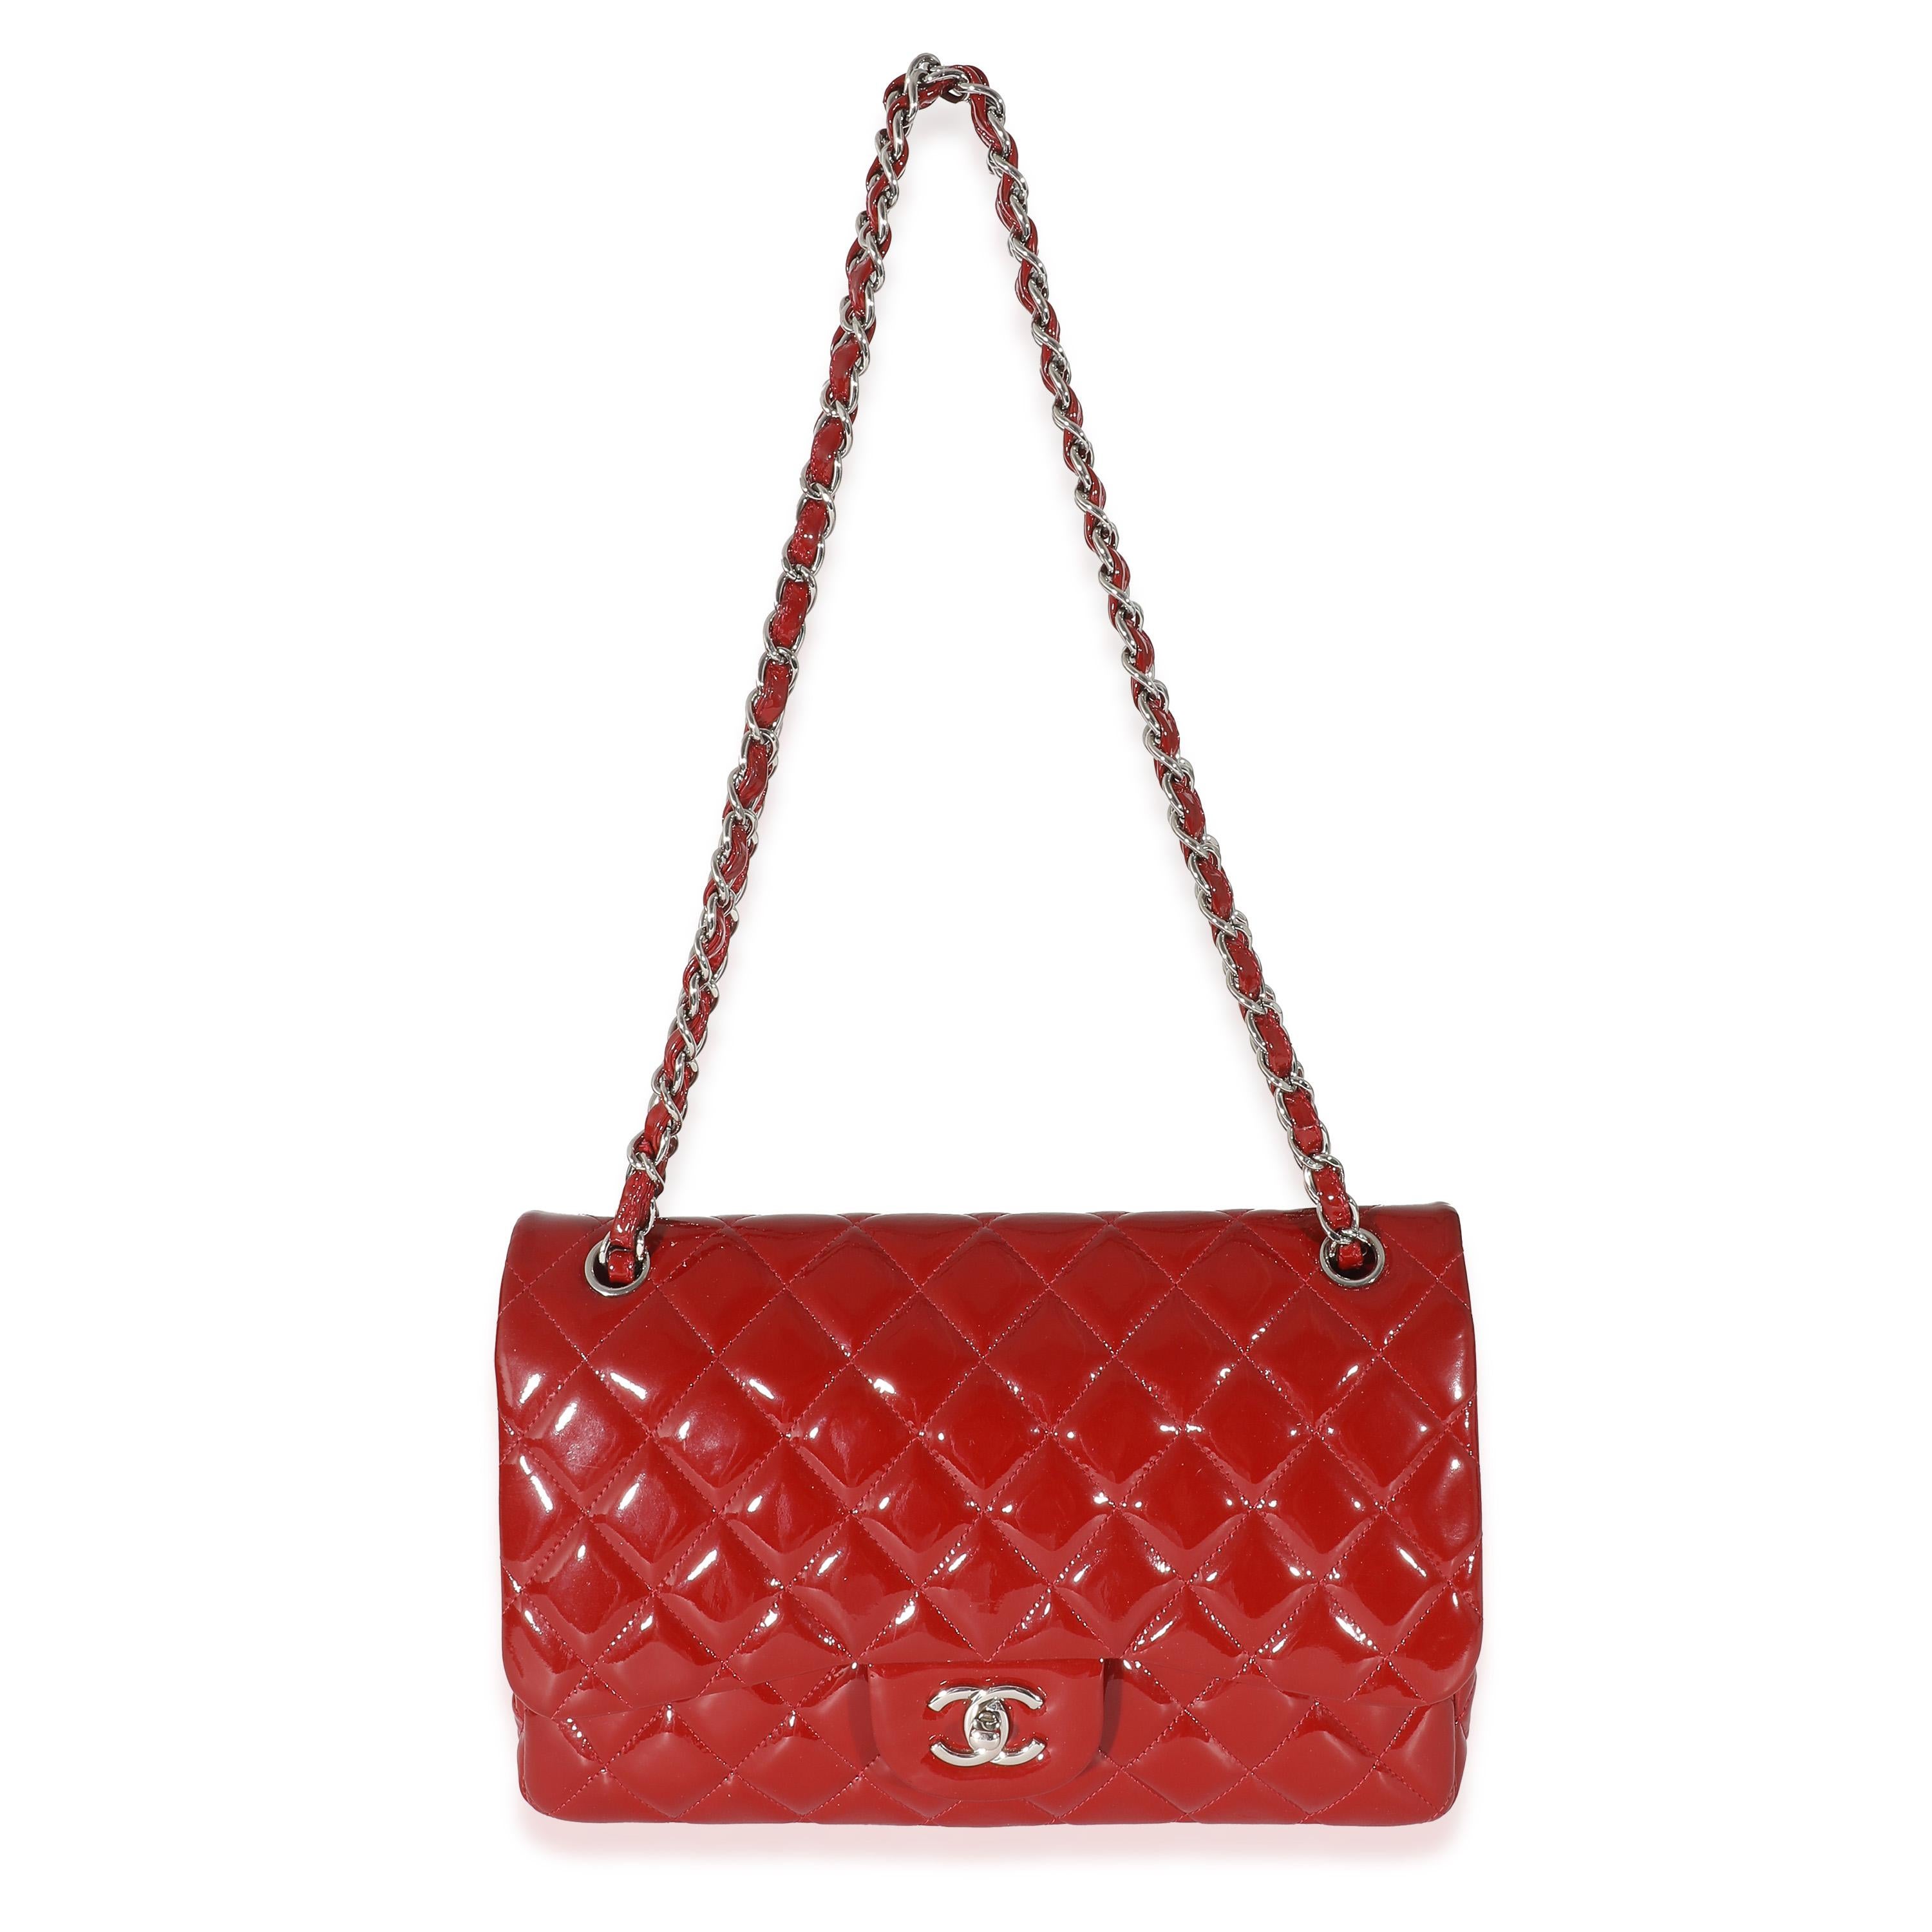 Listing Title: Chanel Red Patent Jumbo Double Flap Bag
SKU: 133768
Condition: Pre-owned 
Condition Description: A timeless classic that never goes out of style, the flap bag from Chanel dates back to 1955 and has seen a number of updates. The design